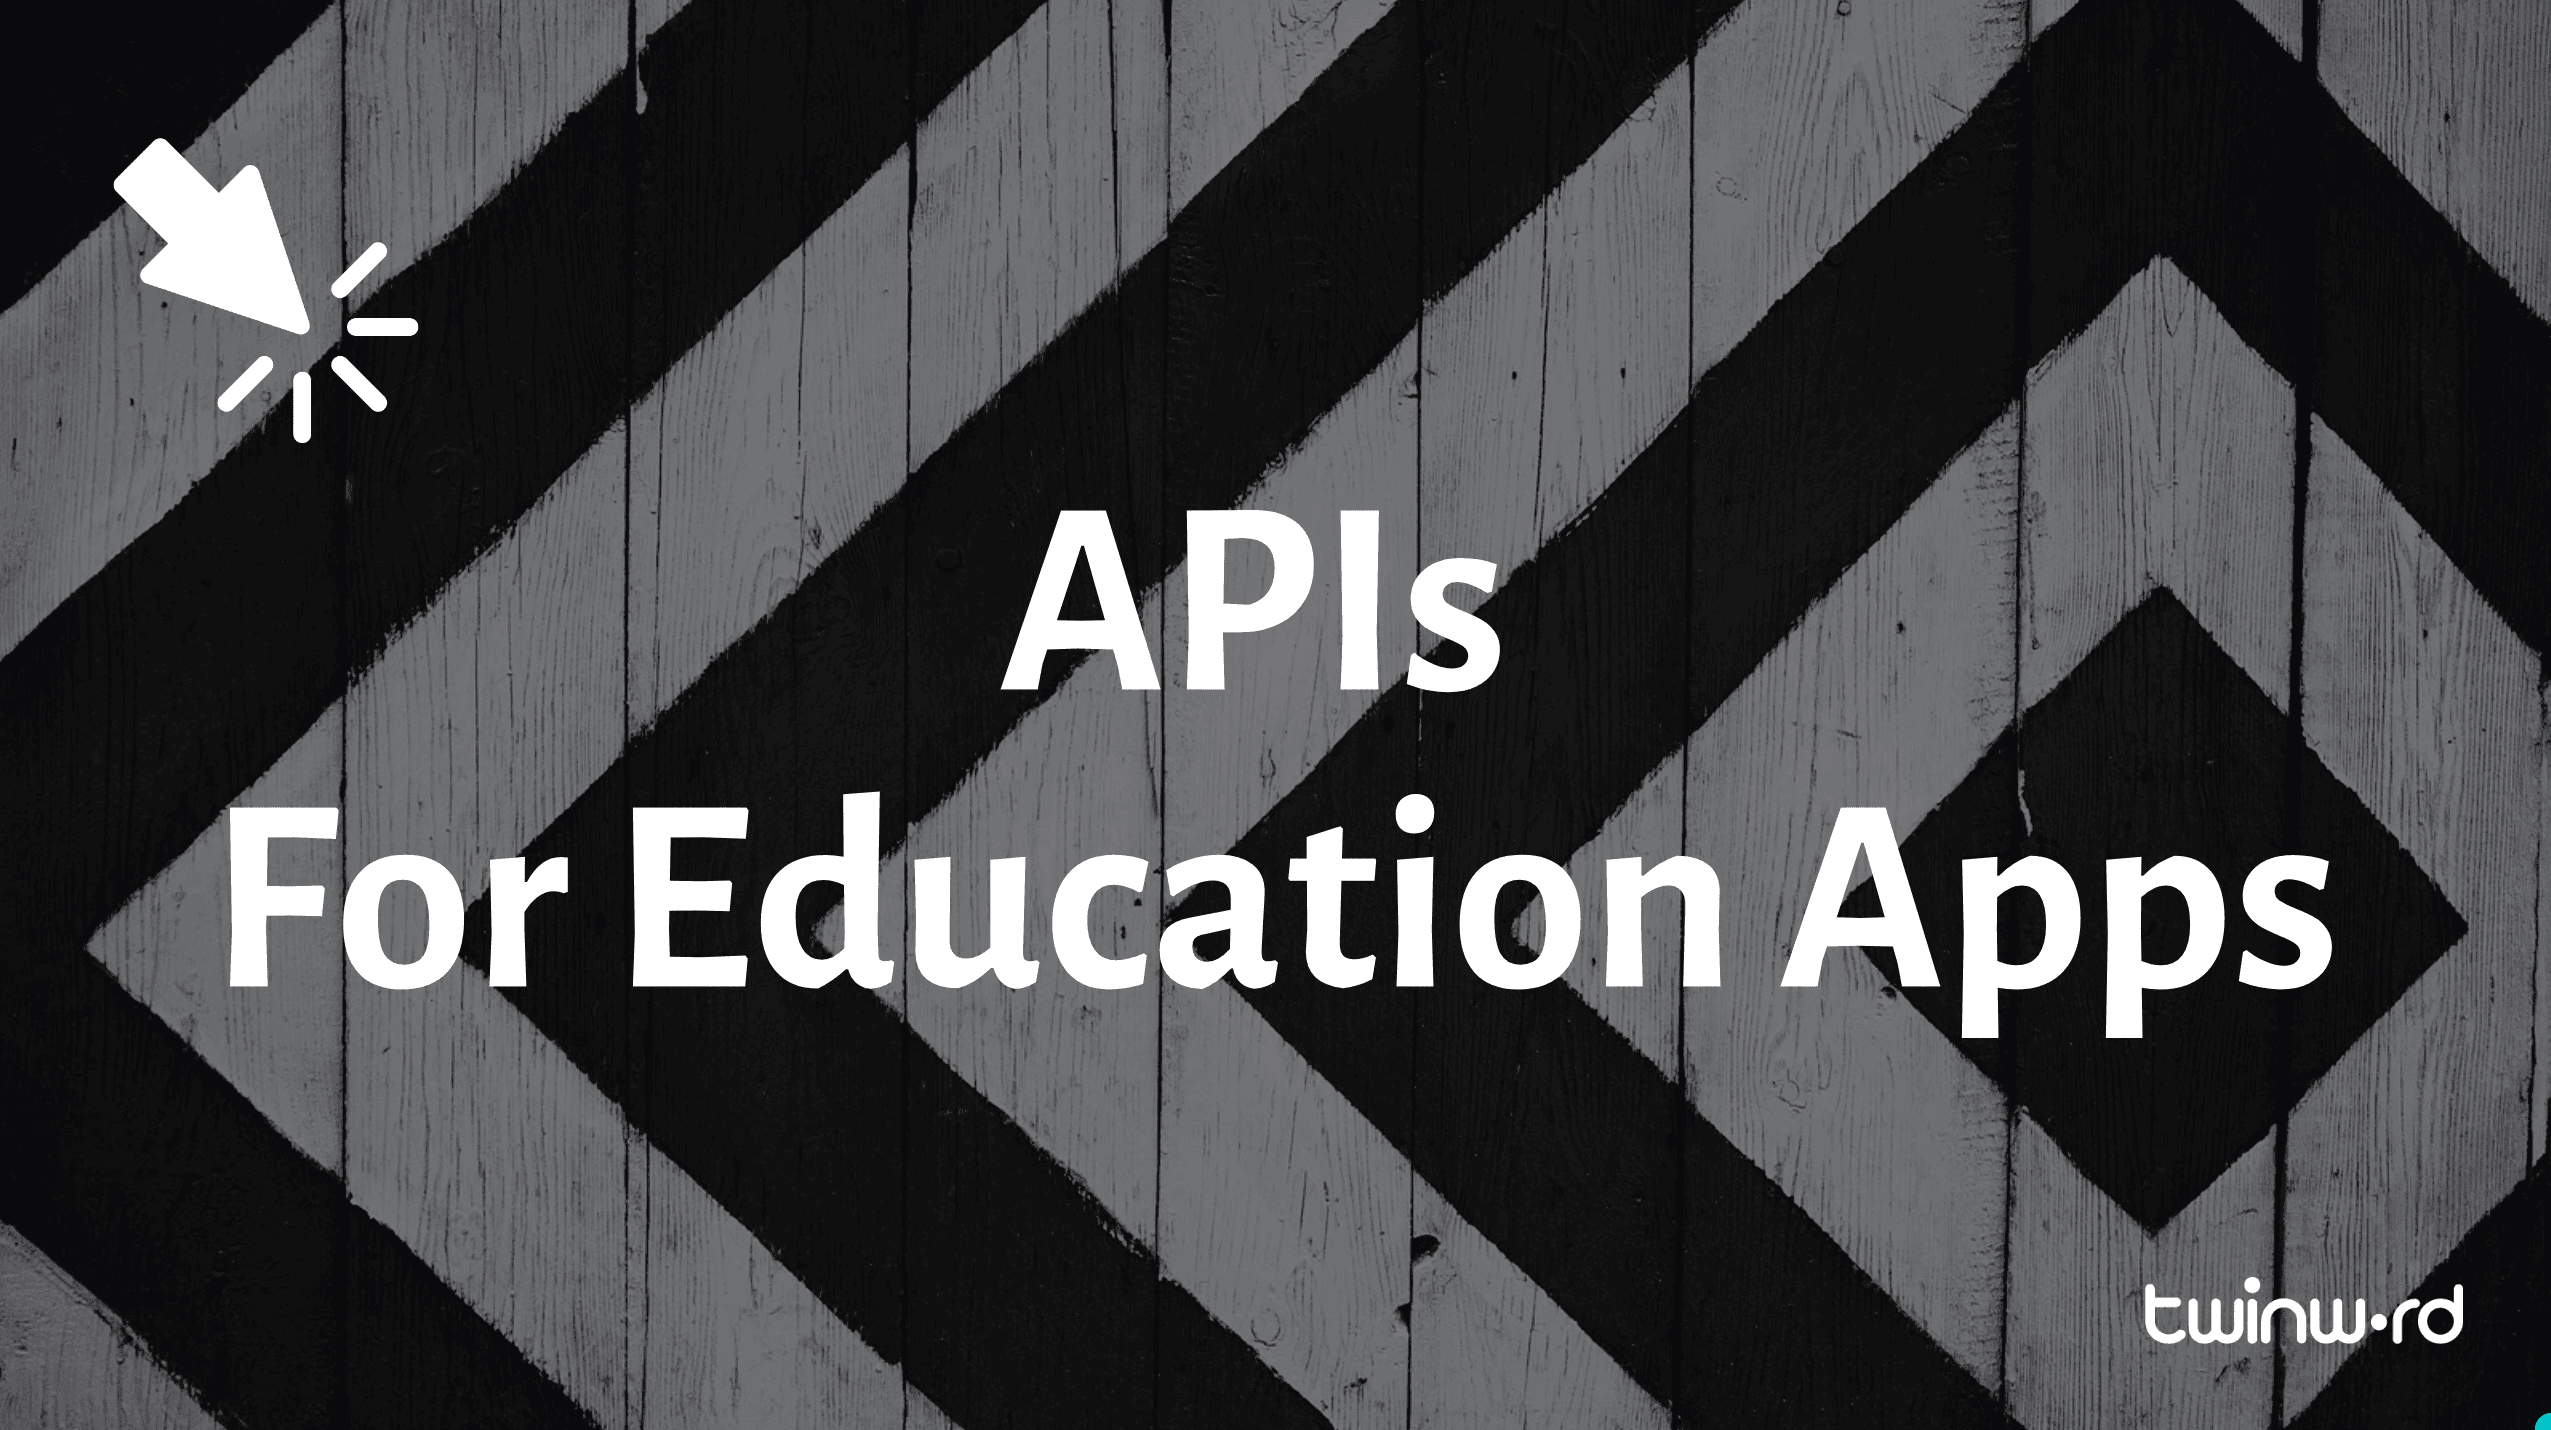 APIs For Education Apps